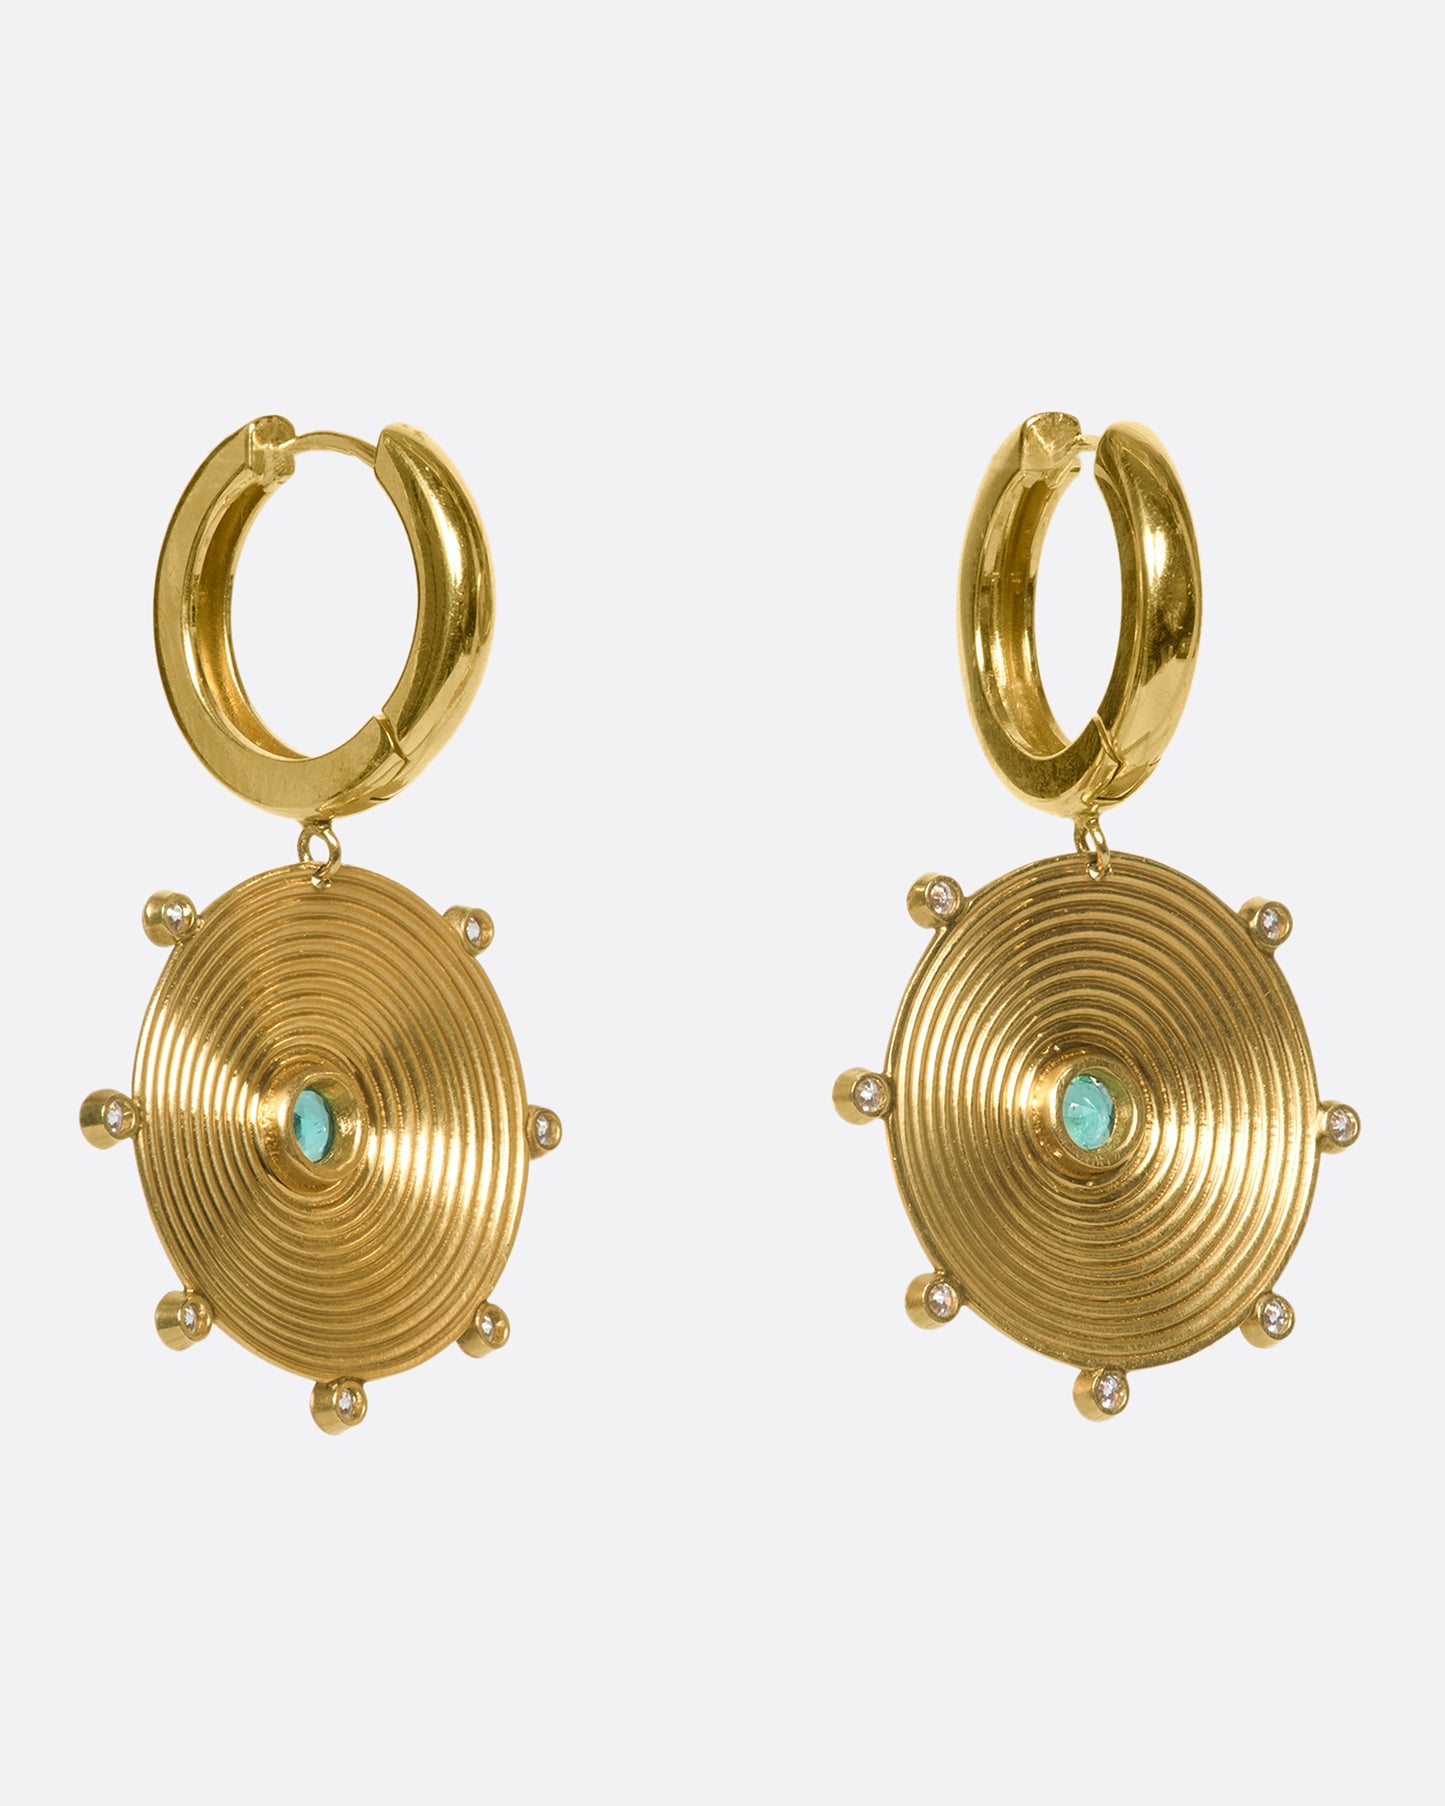 A pair of 14k gold hoops with gold disc drops, dotted with diamonds and emeralds. The discs' ribbed pattern constantly catches the light, giving the illusion of two glowing suns.